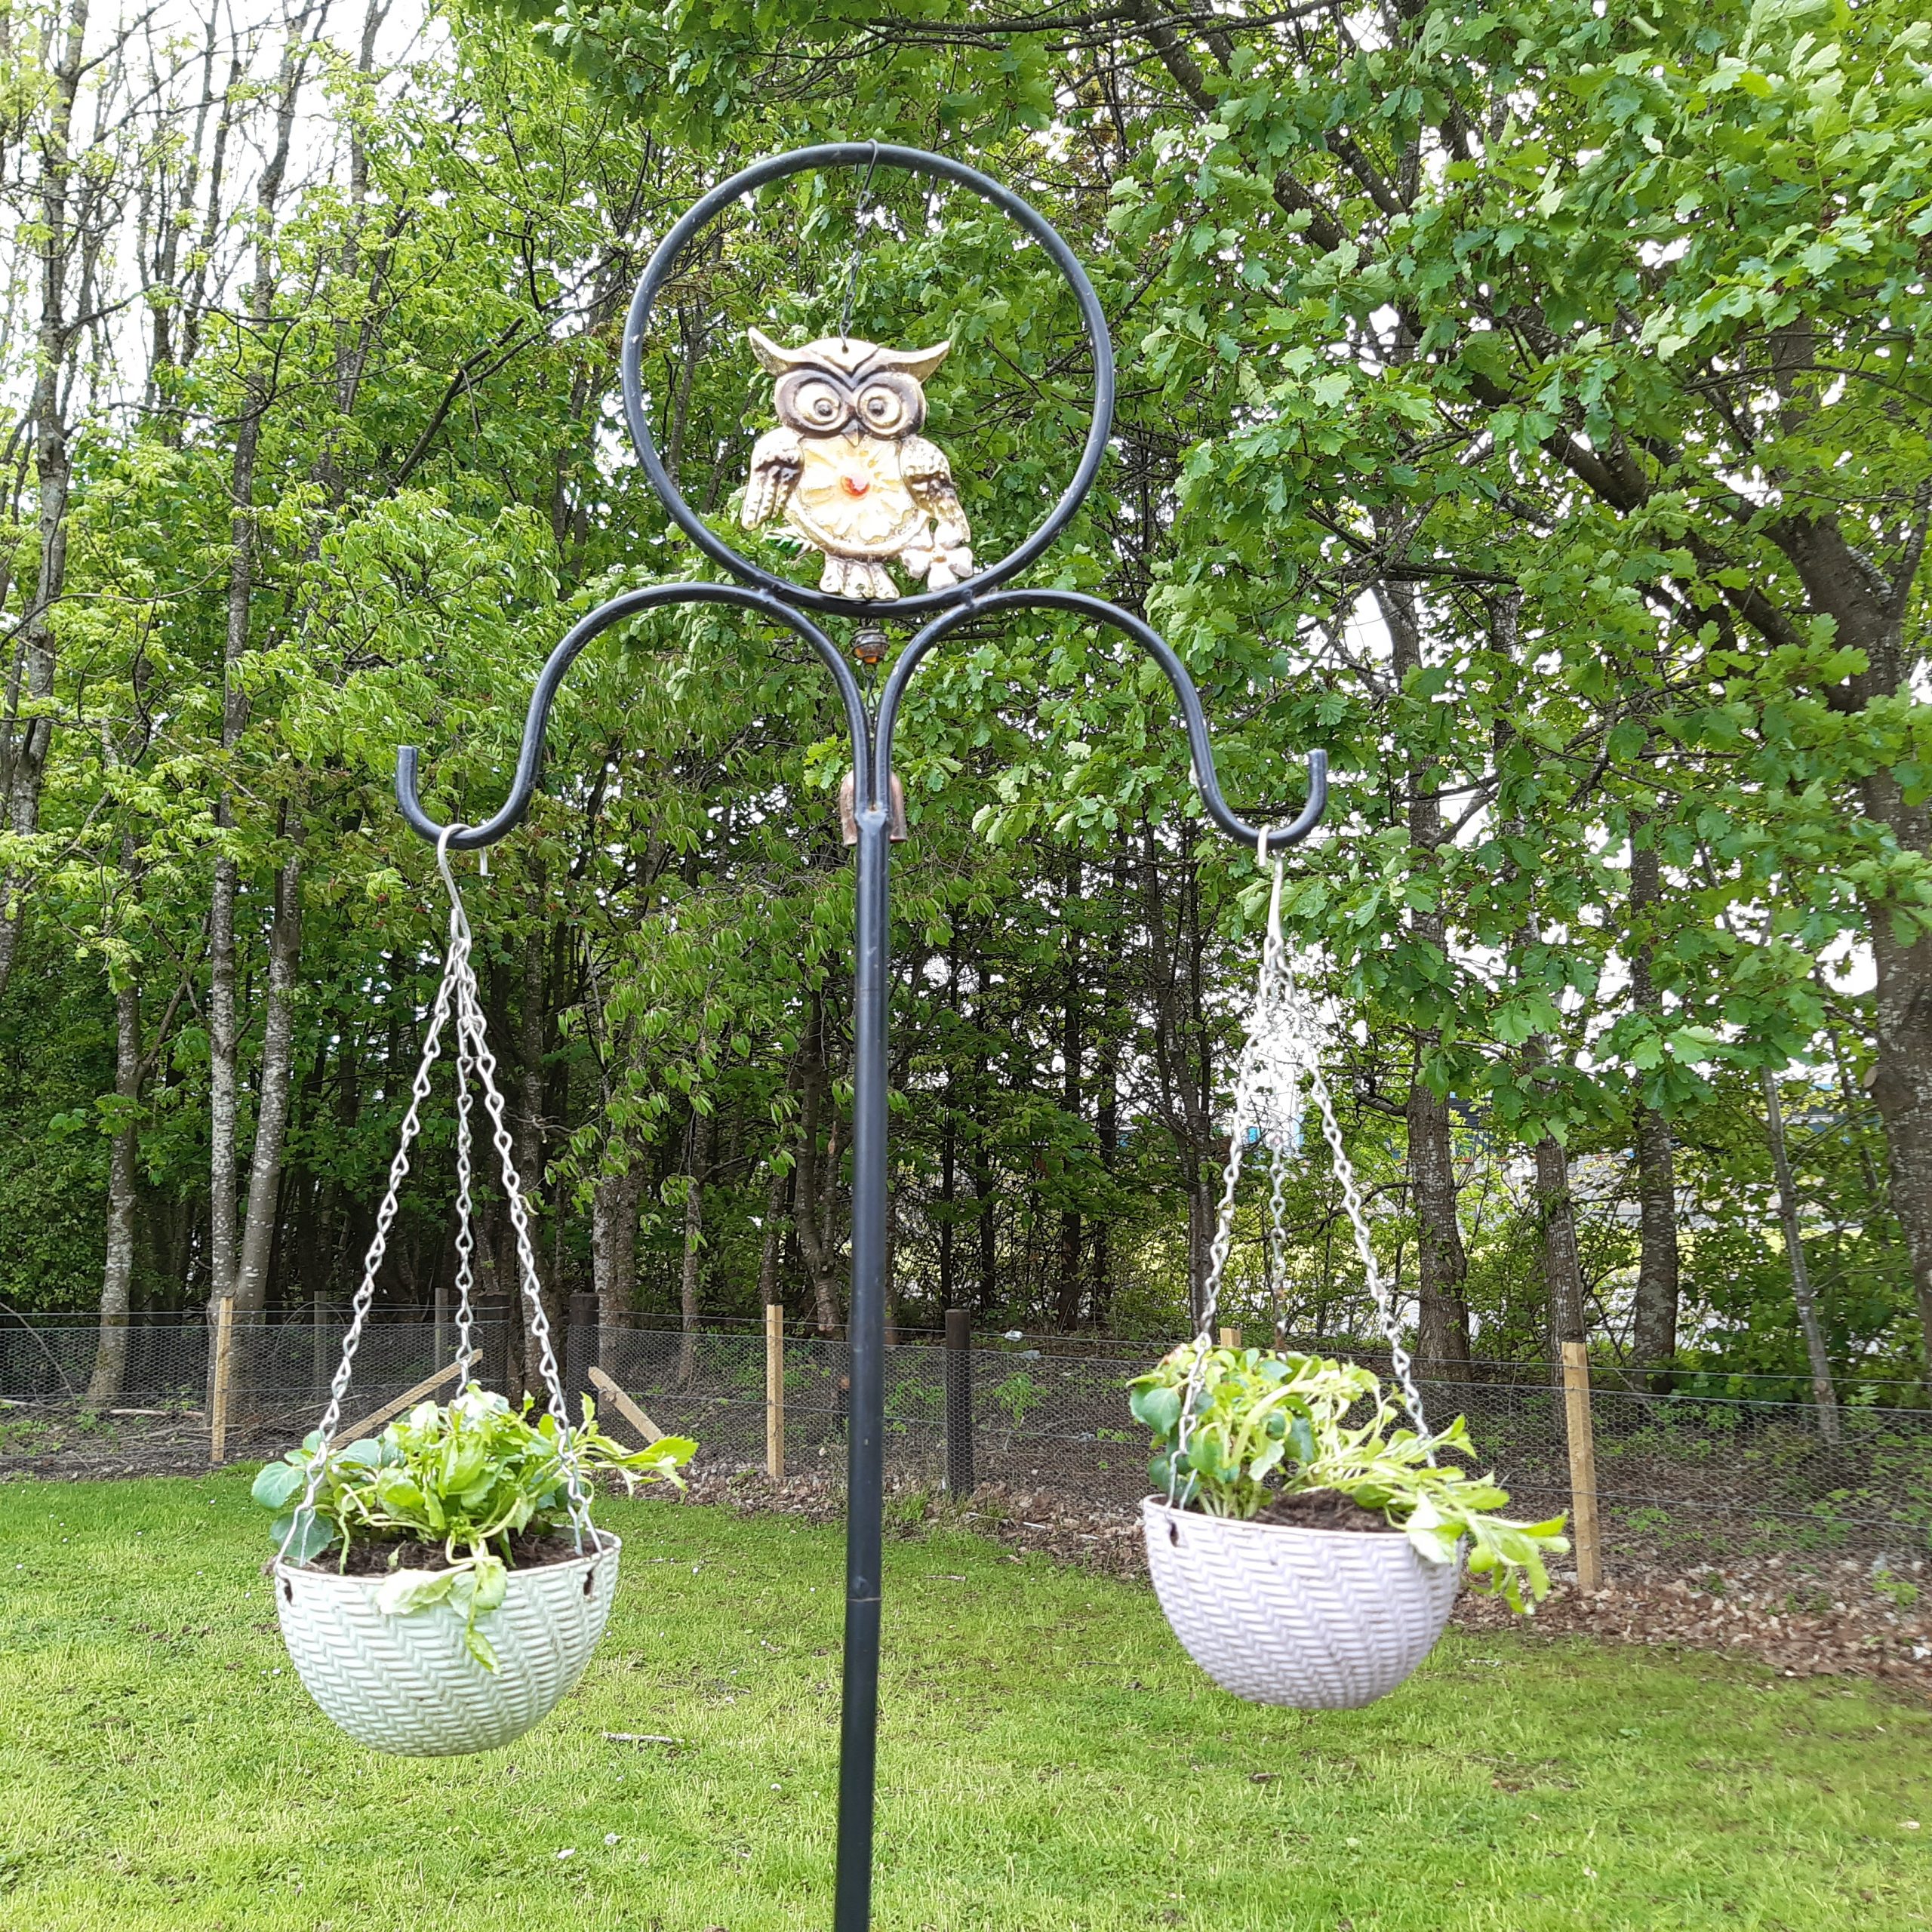 Two hanging baskets with an owl garden ornament in the middle